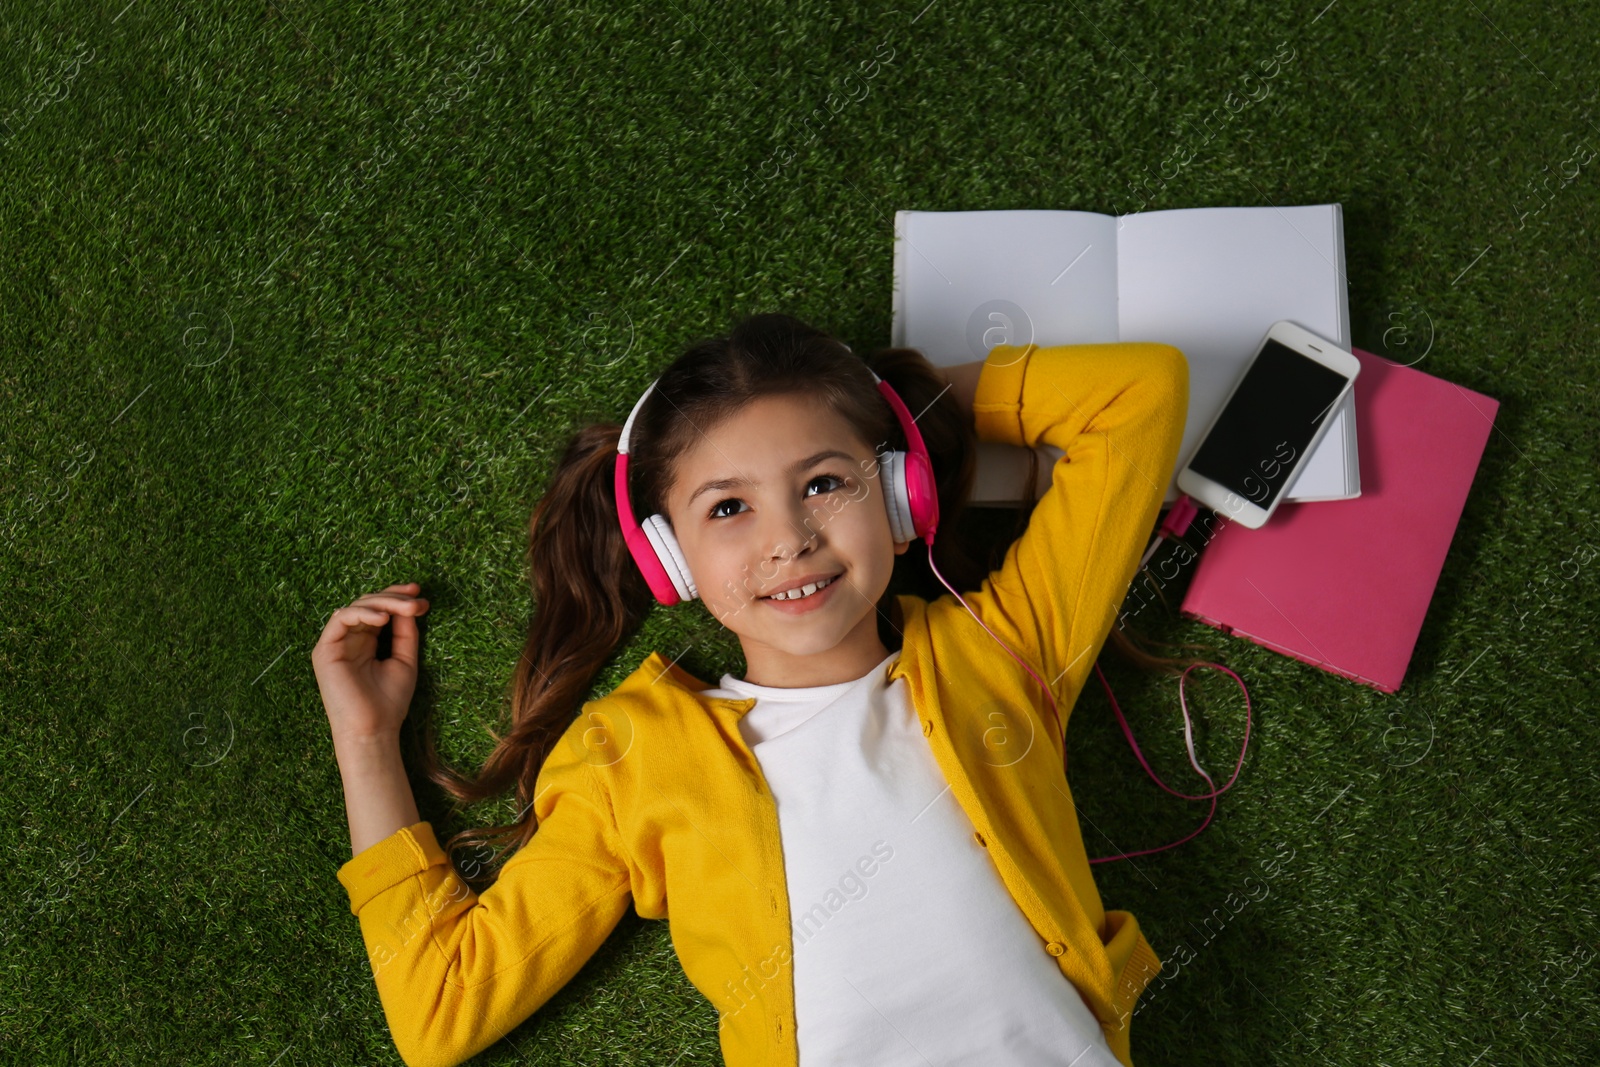 Photo of Cute little girl listening to audiobook on grass, top view